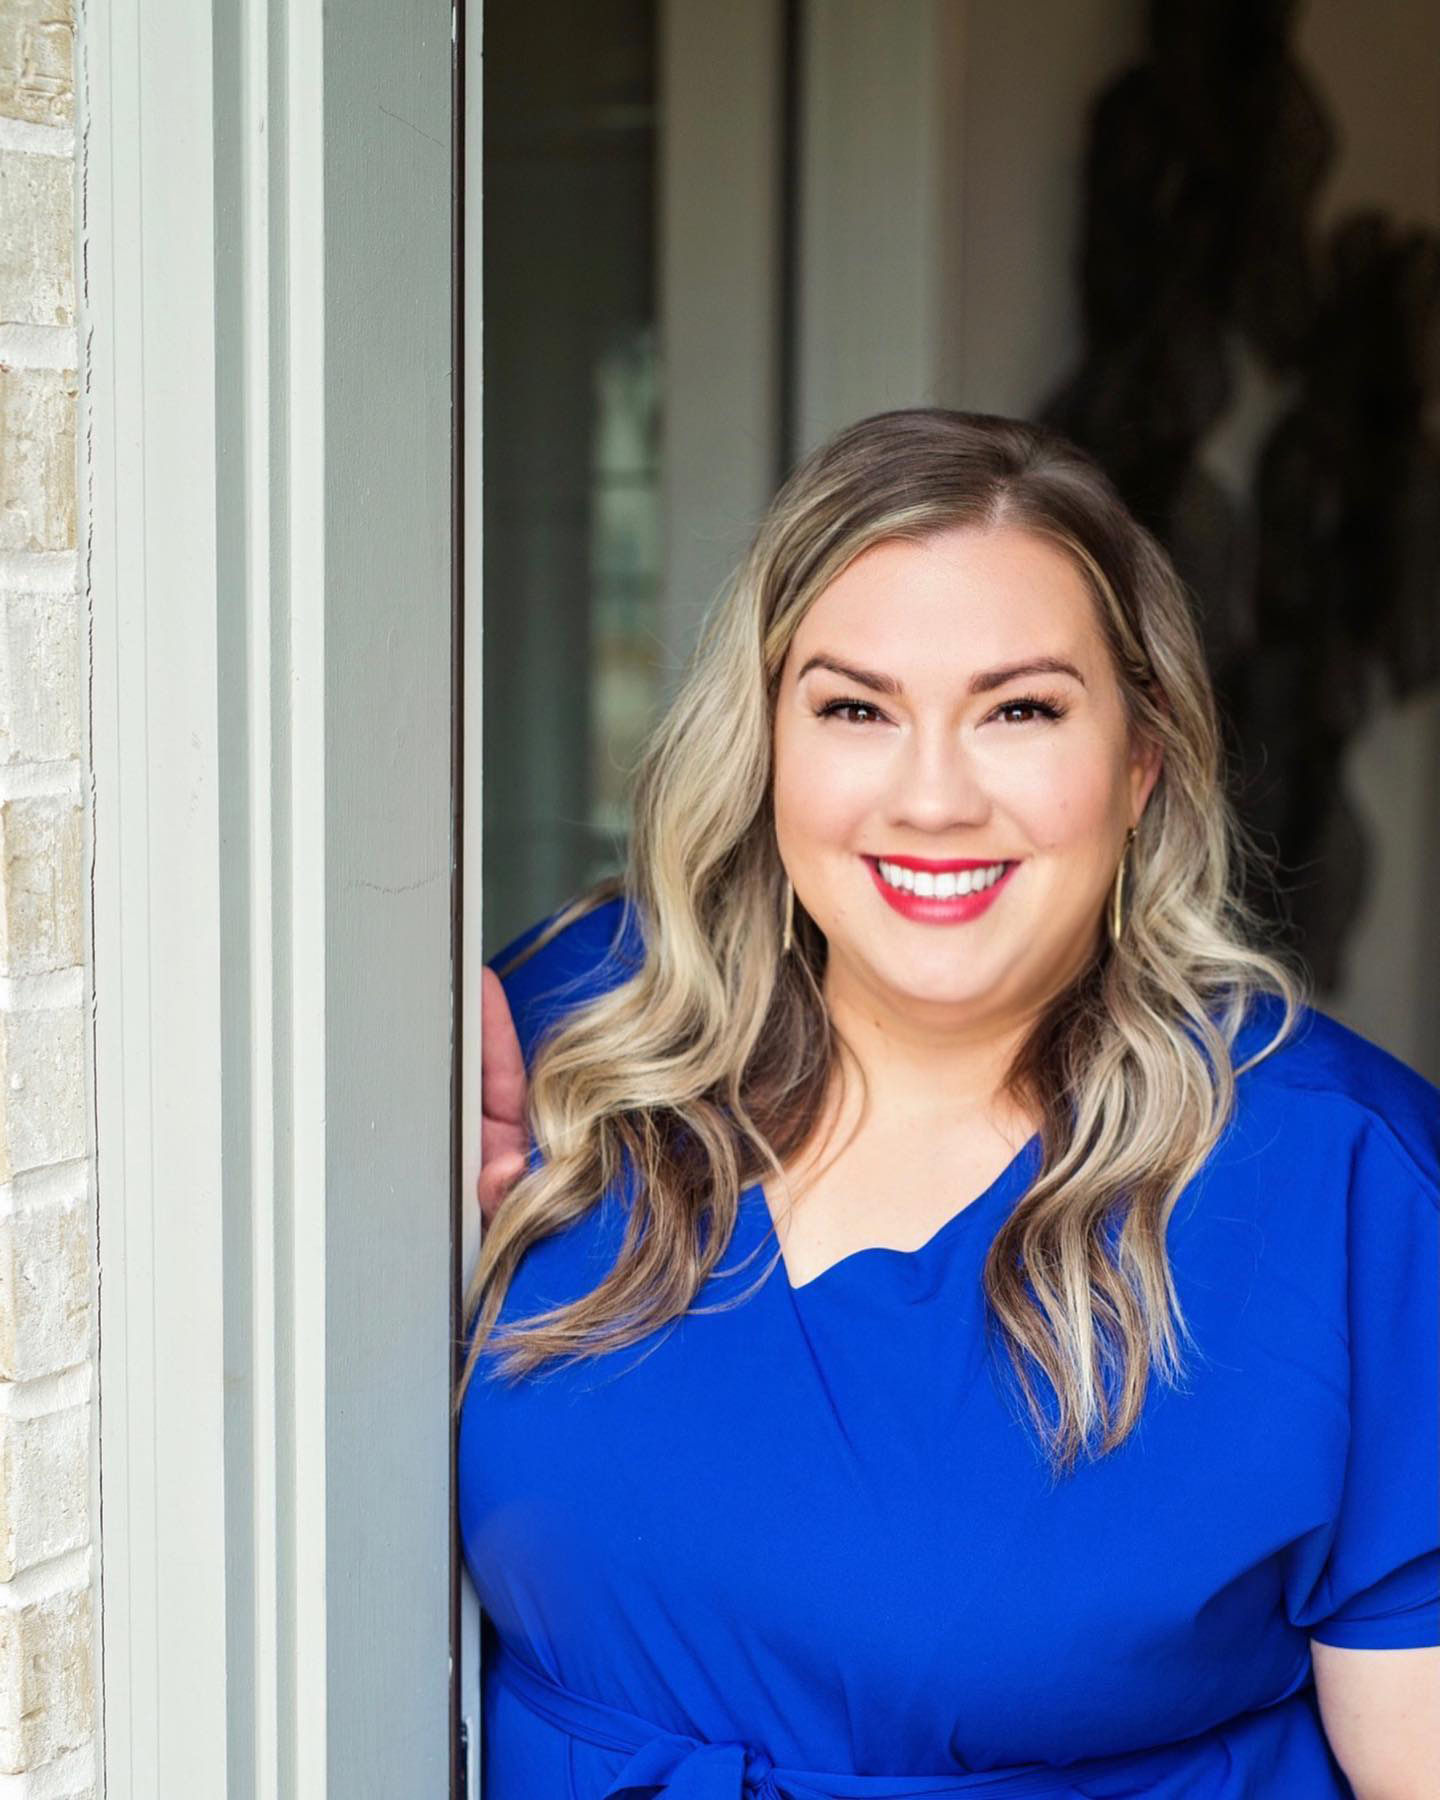 J. Talasek Homes recently appointed Jessica Bennett as Vice President of Marketing